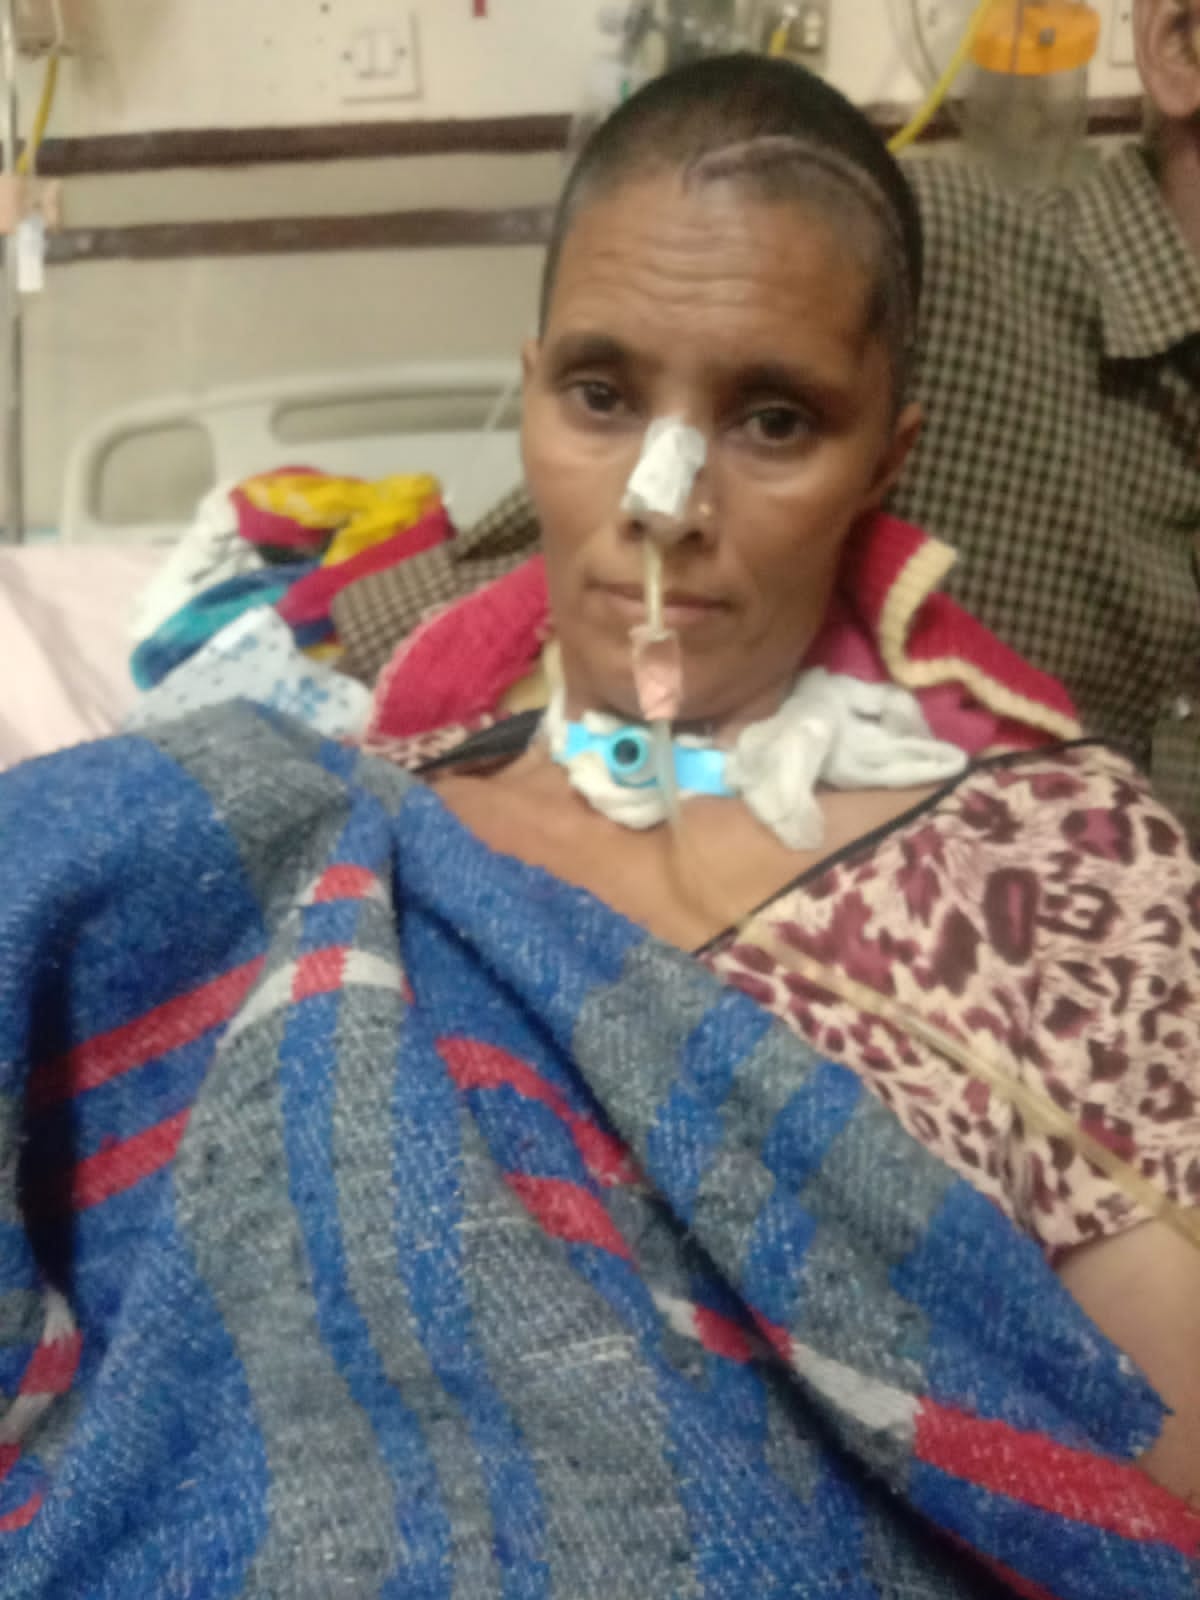 After a brain hemorrhage, Prabha Devi Ji has been admitted to P.G.I Hospital in Chandigarh, seeking help for her treatment